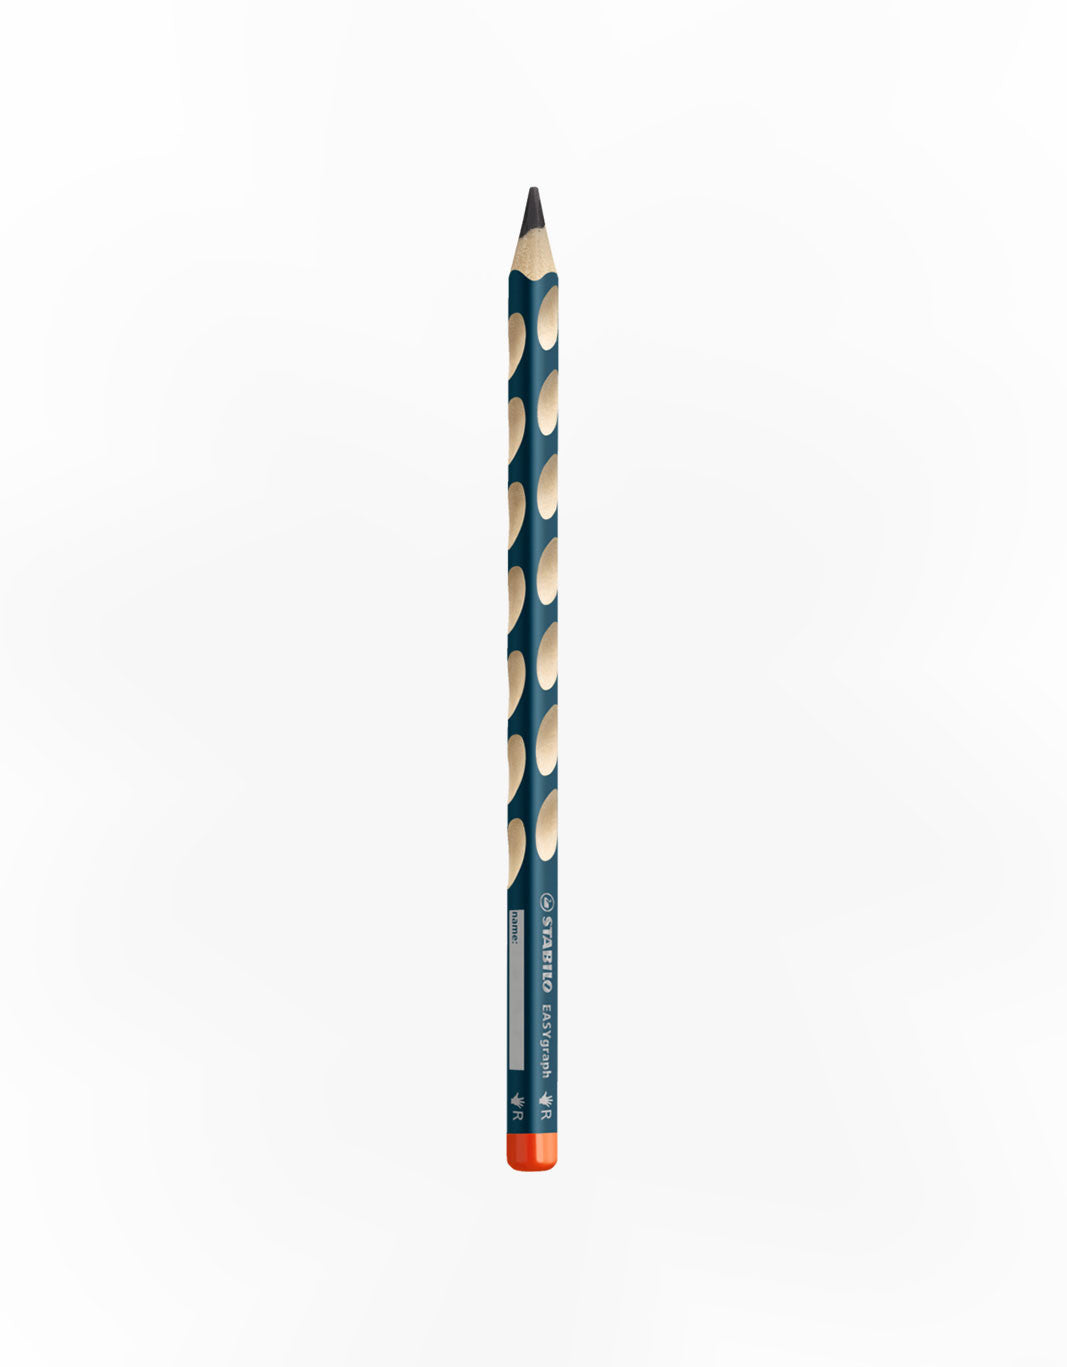 STABILO EASYgraph (Right-handed) Wooden Pencil - Schwan-STABILO -Most colourful Stationery Shop